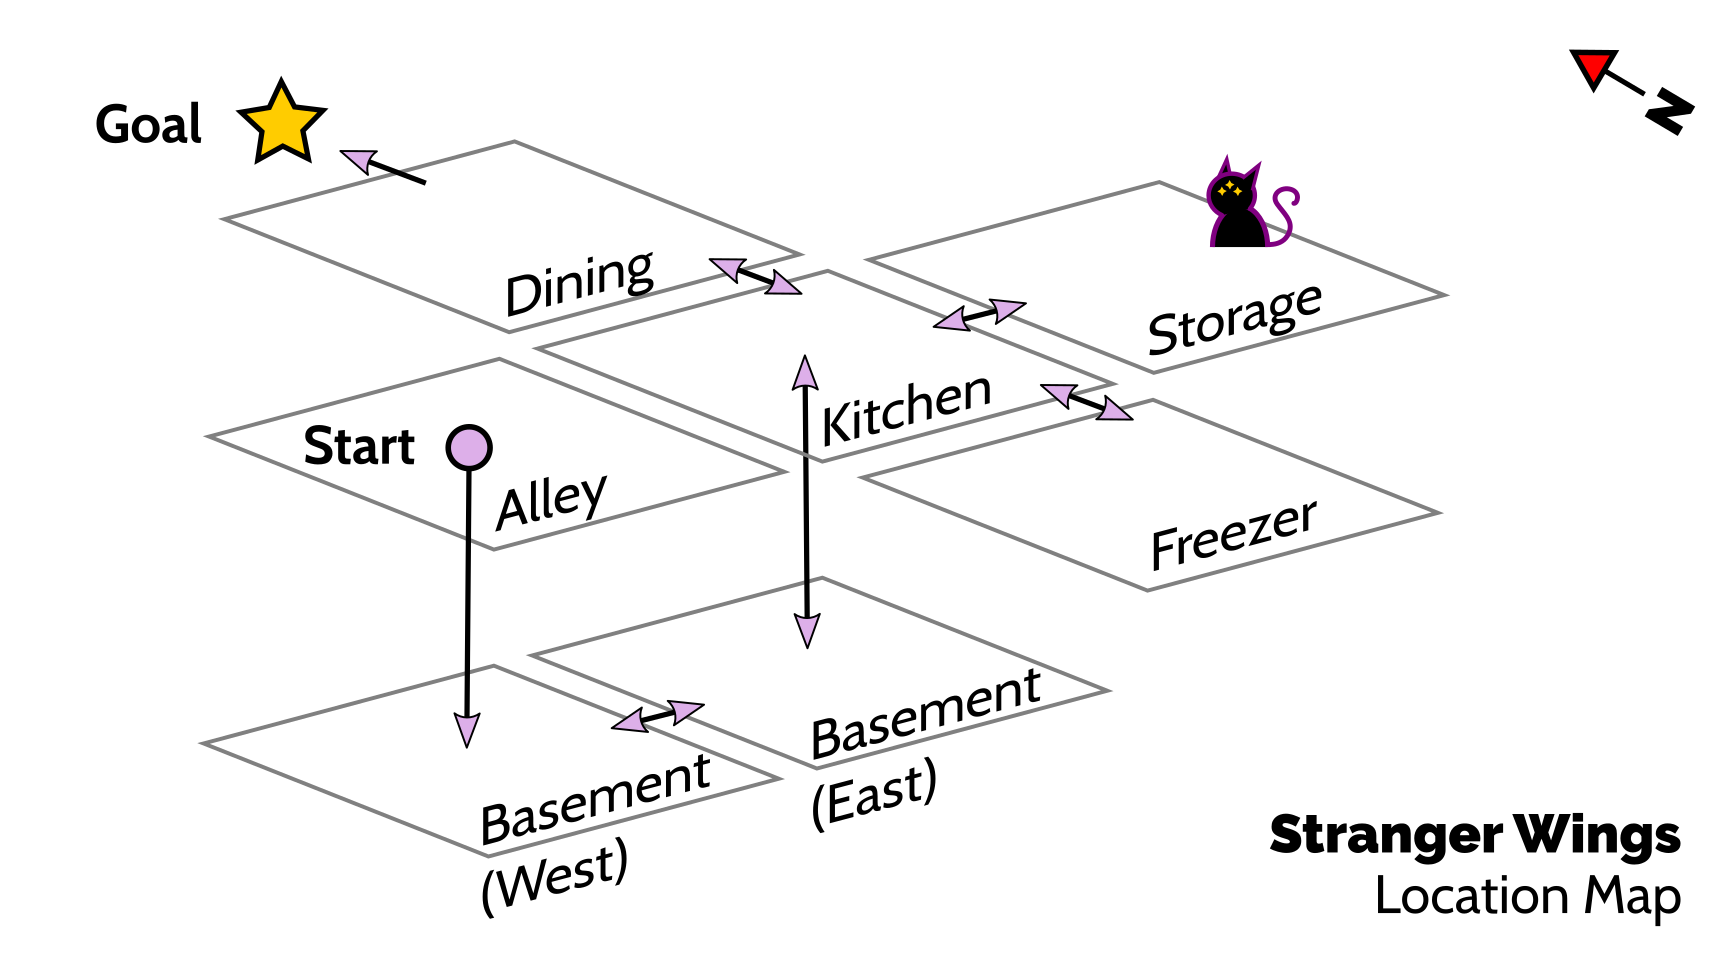 Stranger Wings: Location Map, a line drawing of the game's locations relative to each other